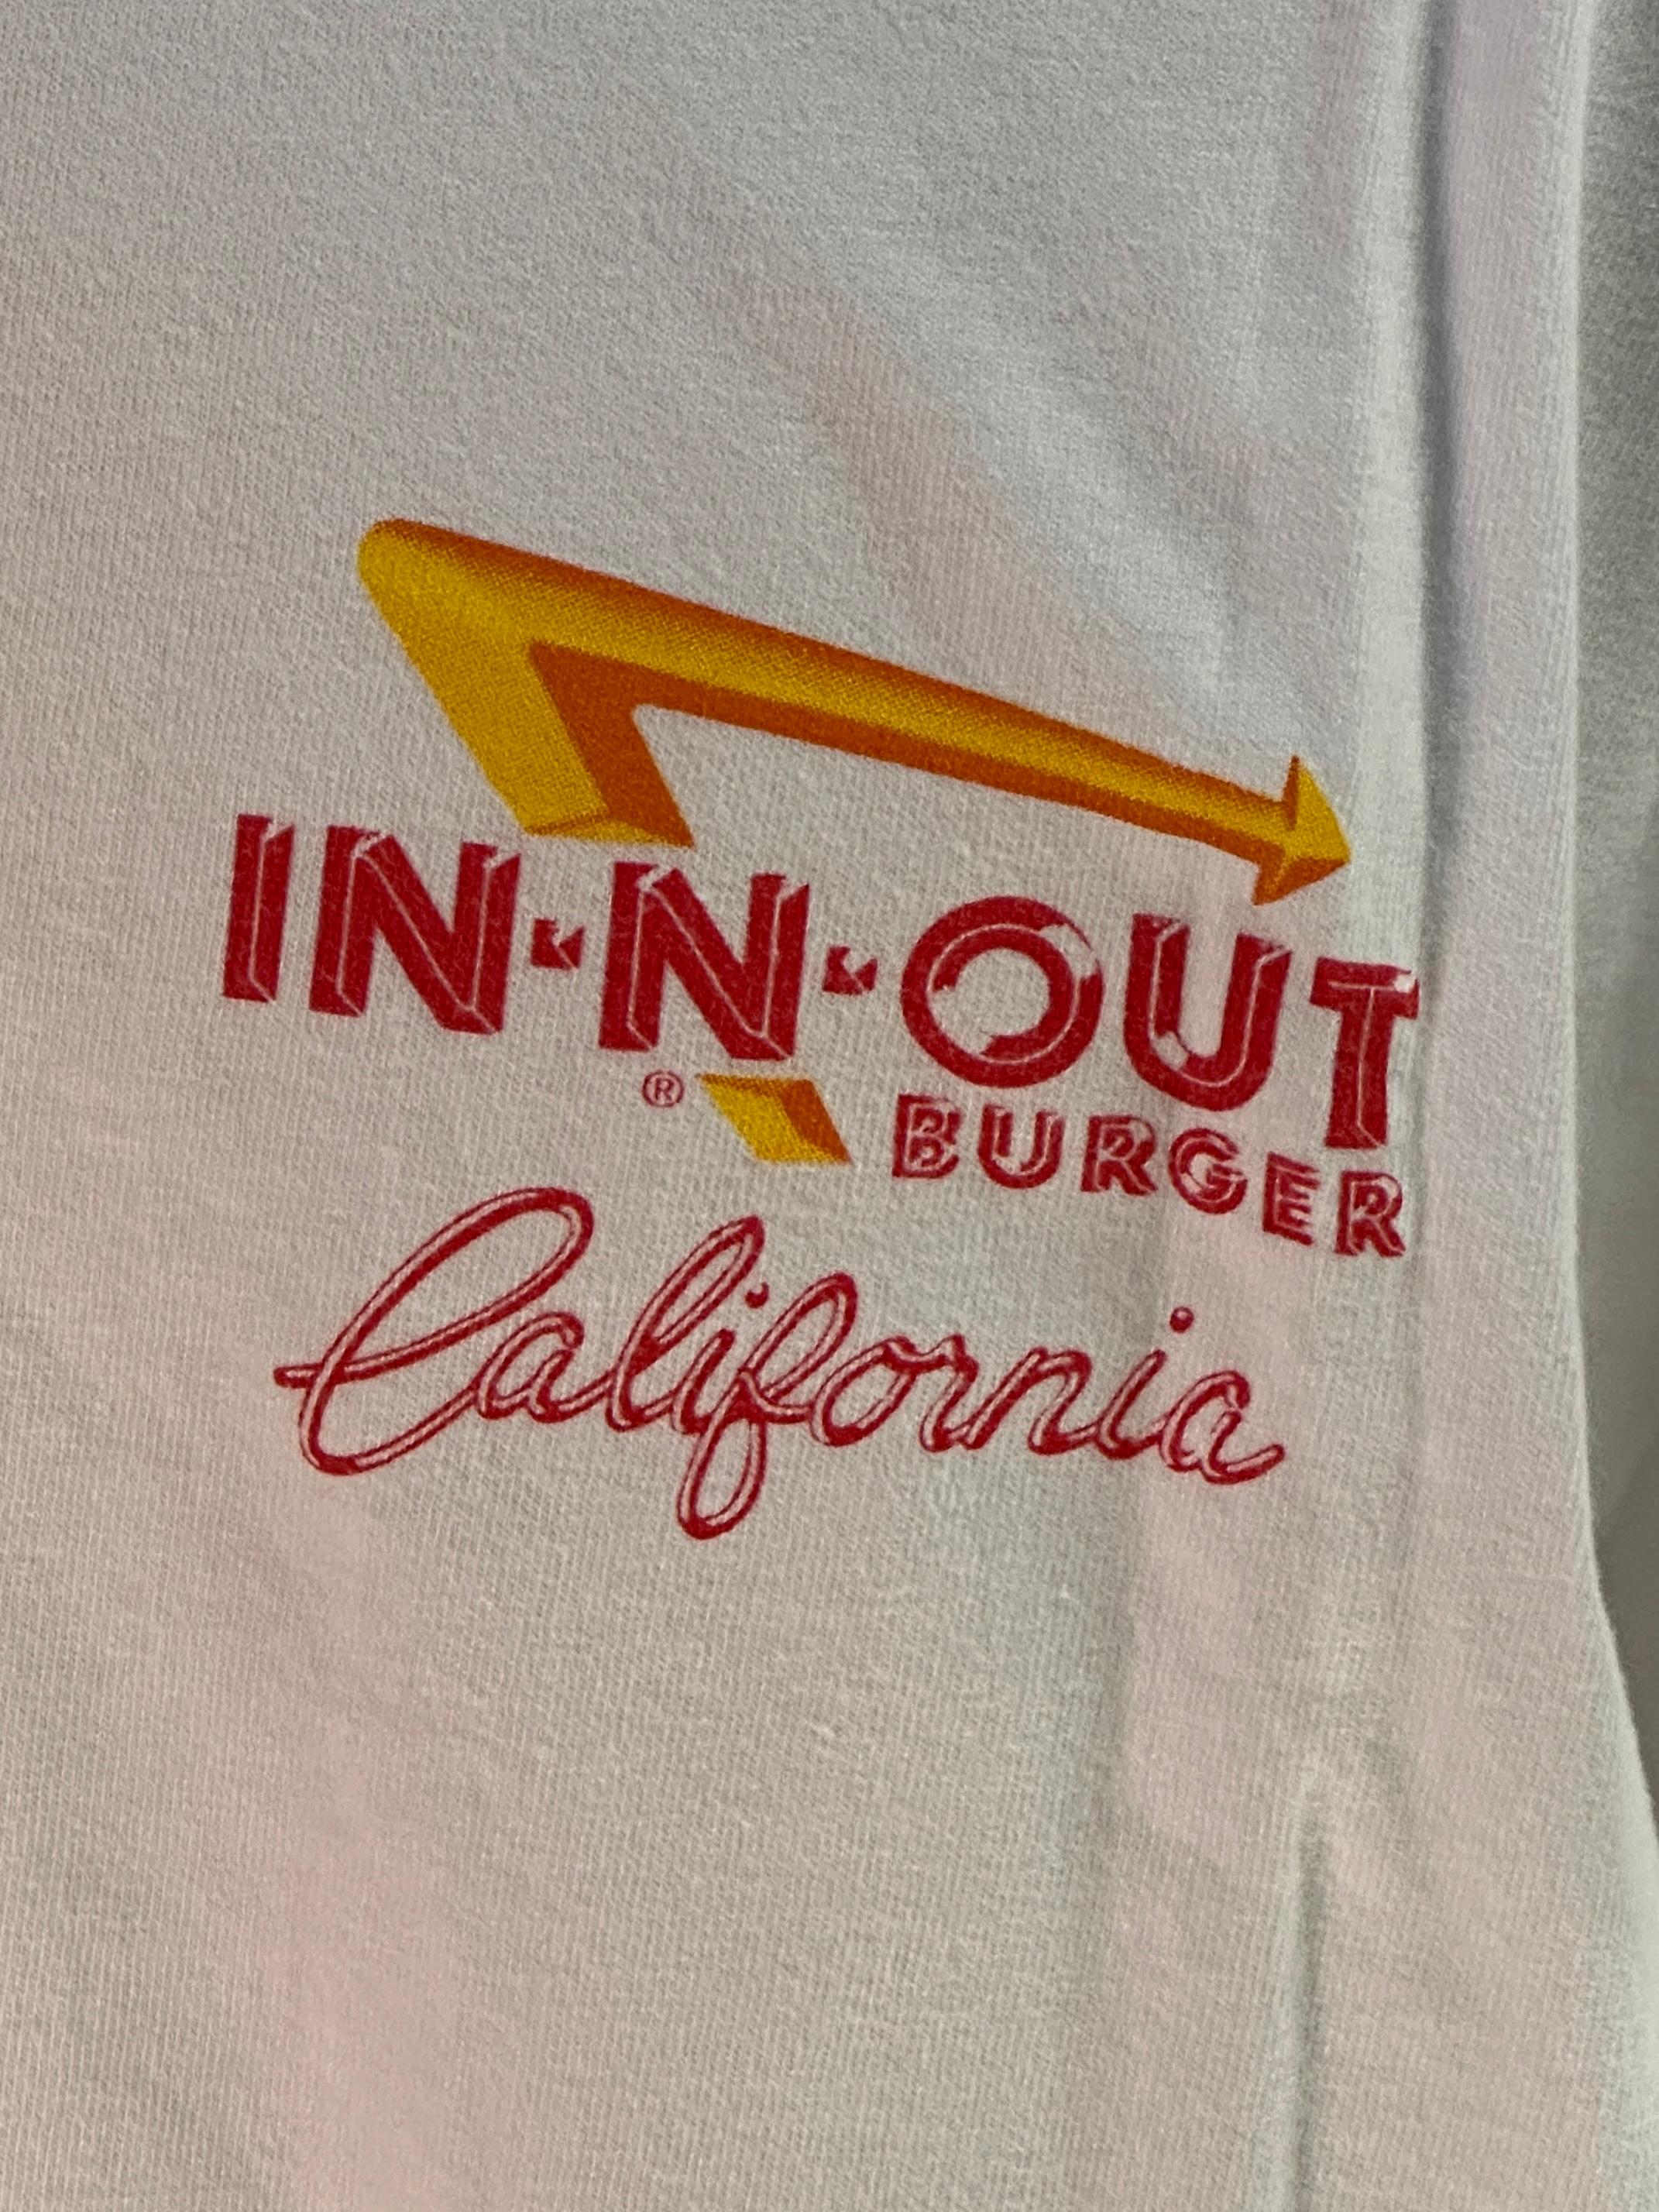 Vintage In-N-Out Burger T-Shirt